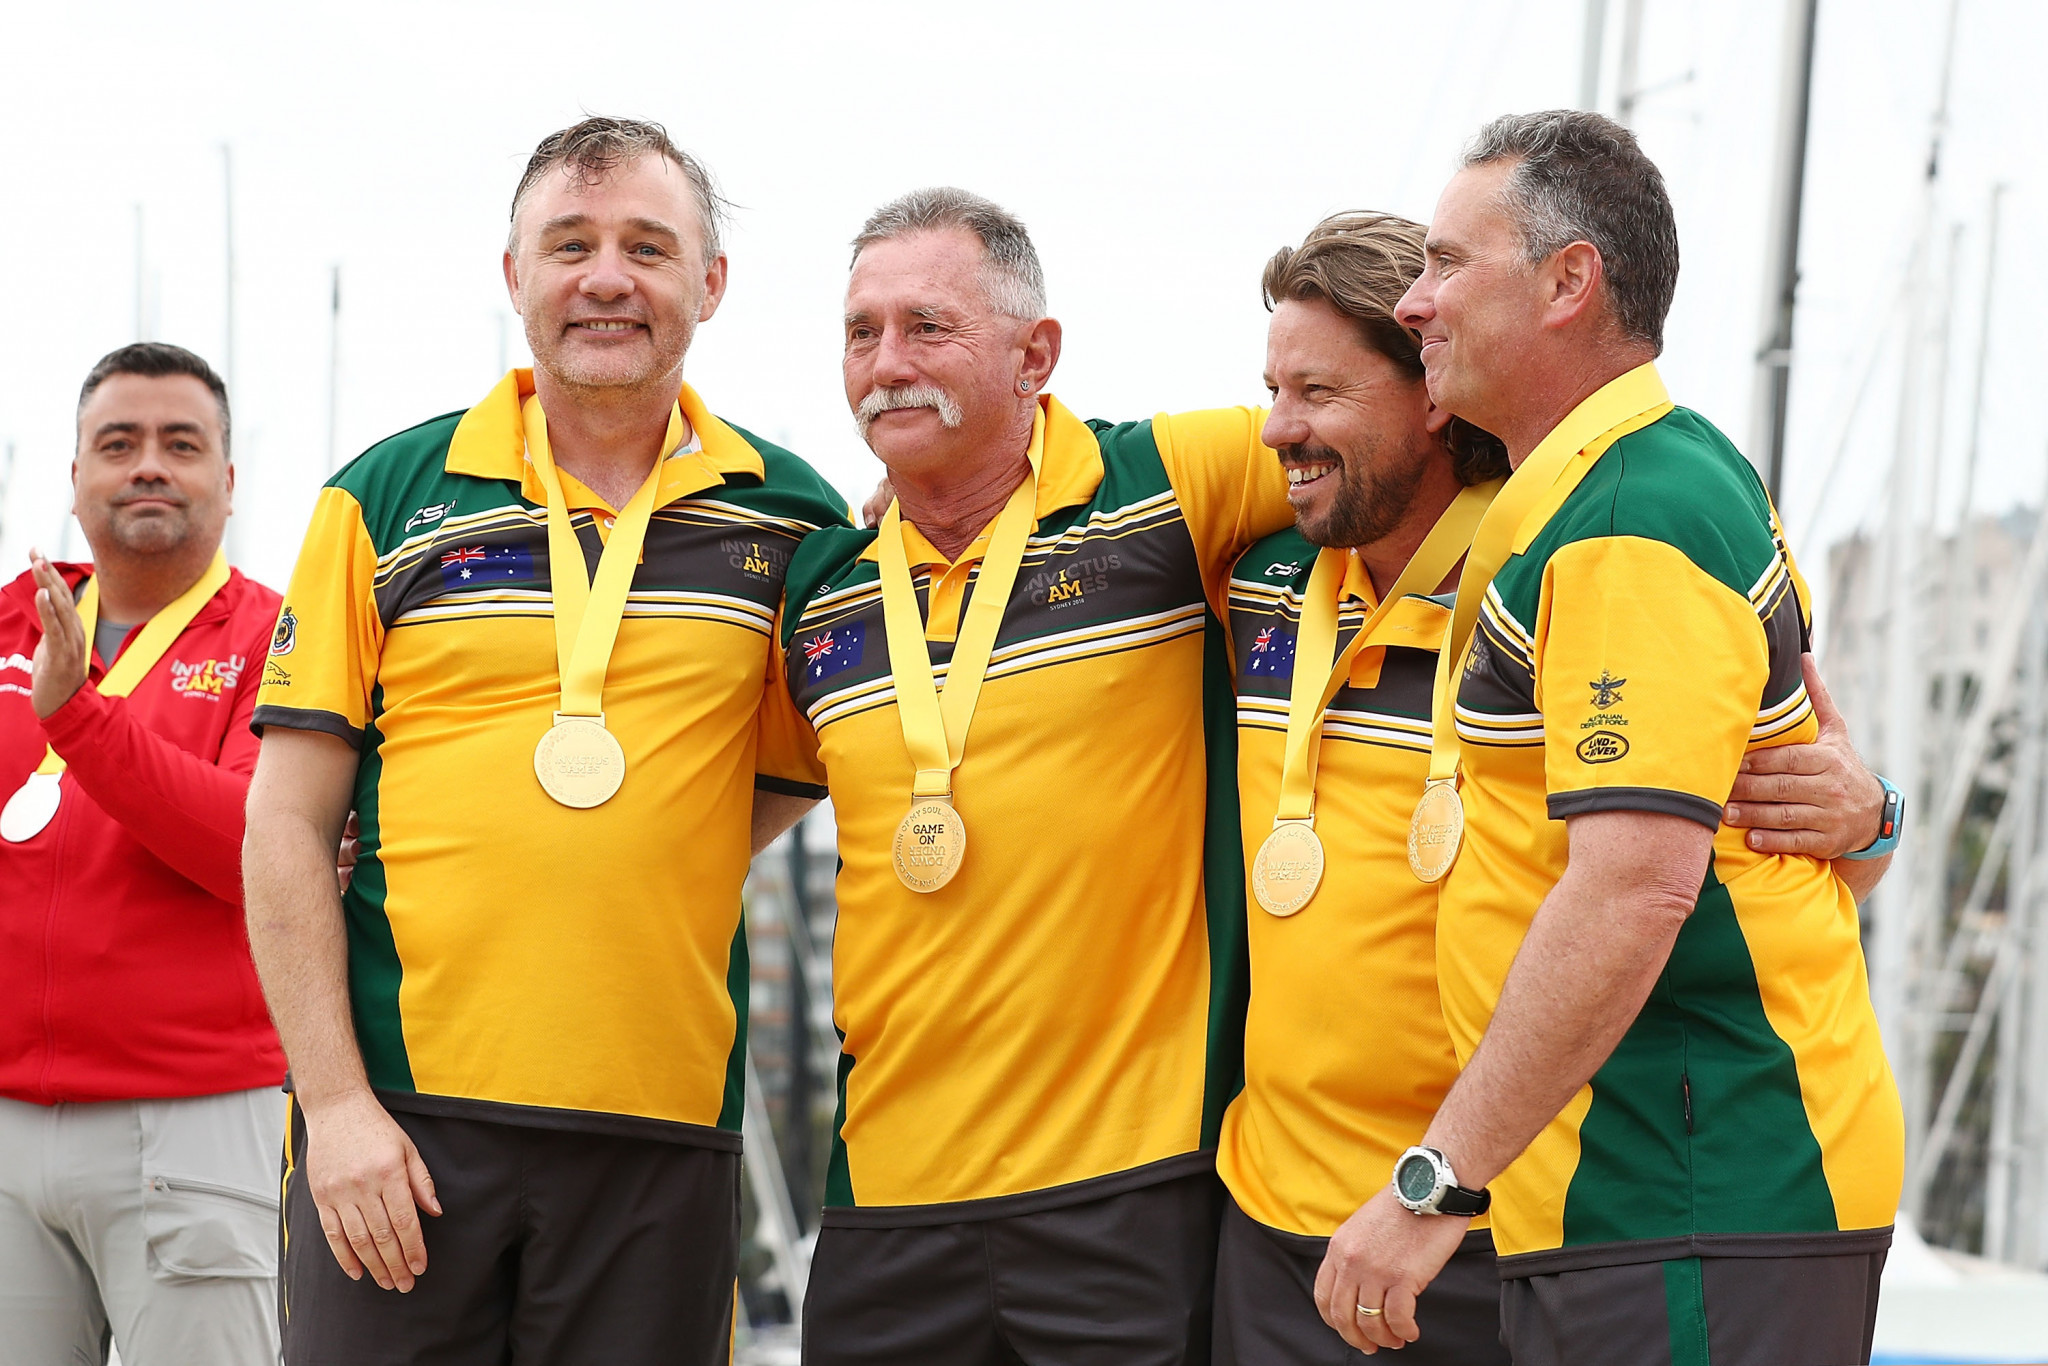 Australia won gold in the final of the Elliot 7 team event at the 2018 Sydney Invictus Games ©Getty Images 